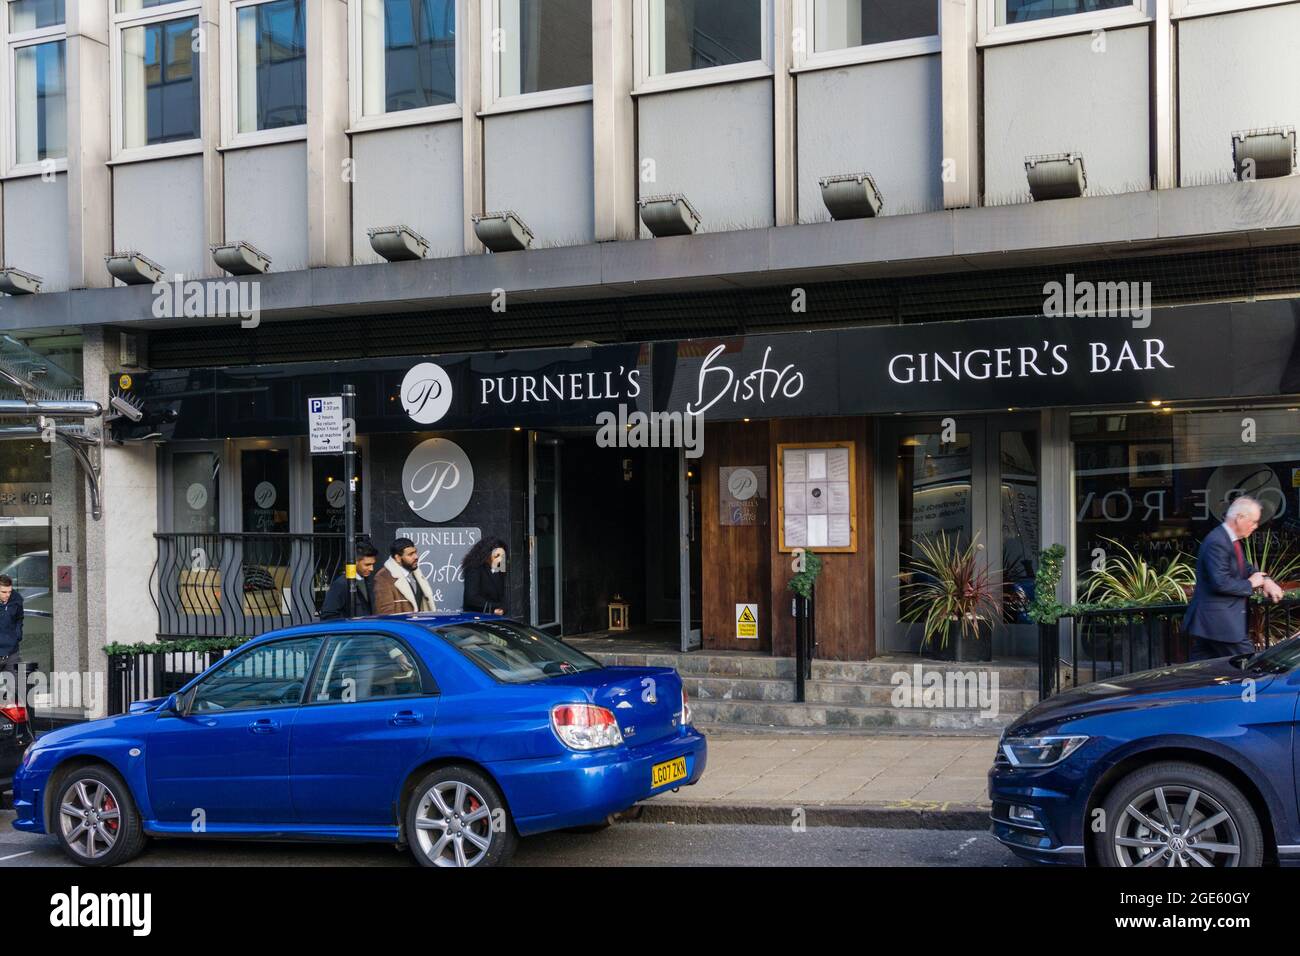 Exterior of Purnell's Bistro and Ginger's Bar, Birmingham, UK Stock Photo